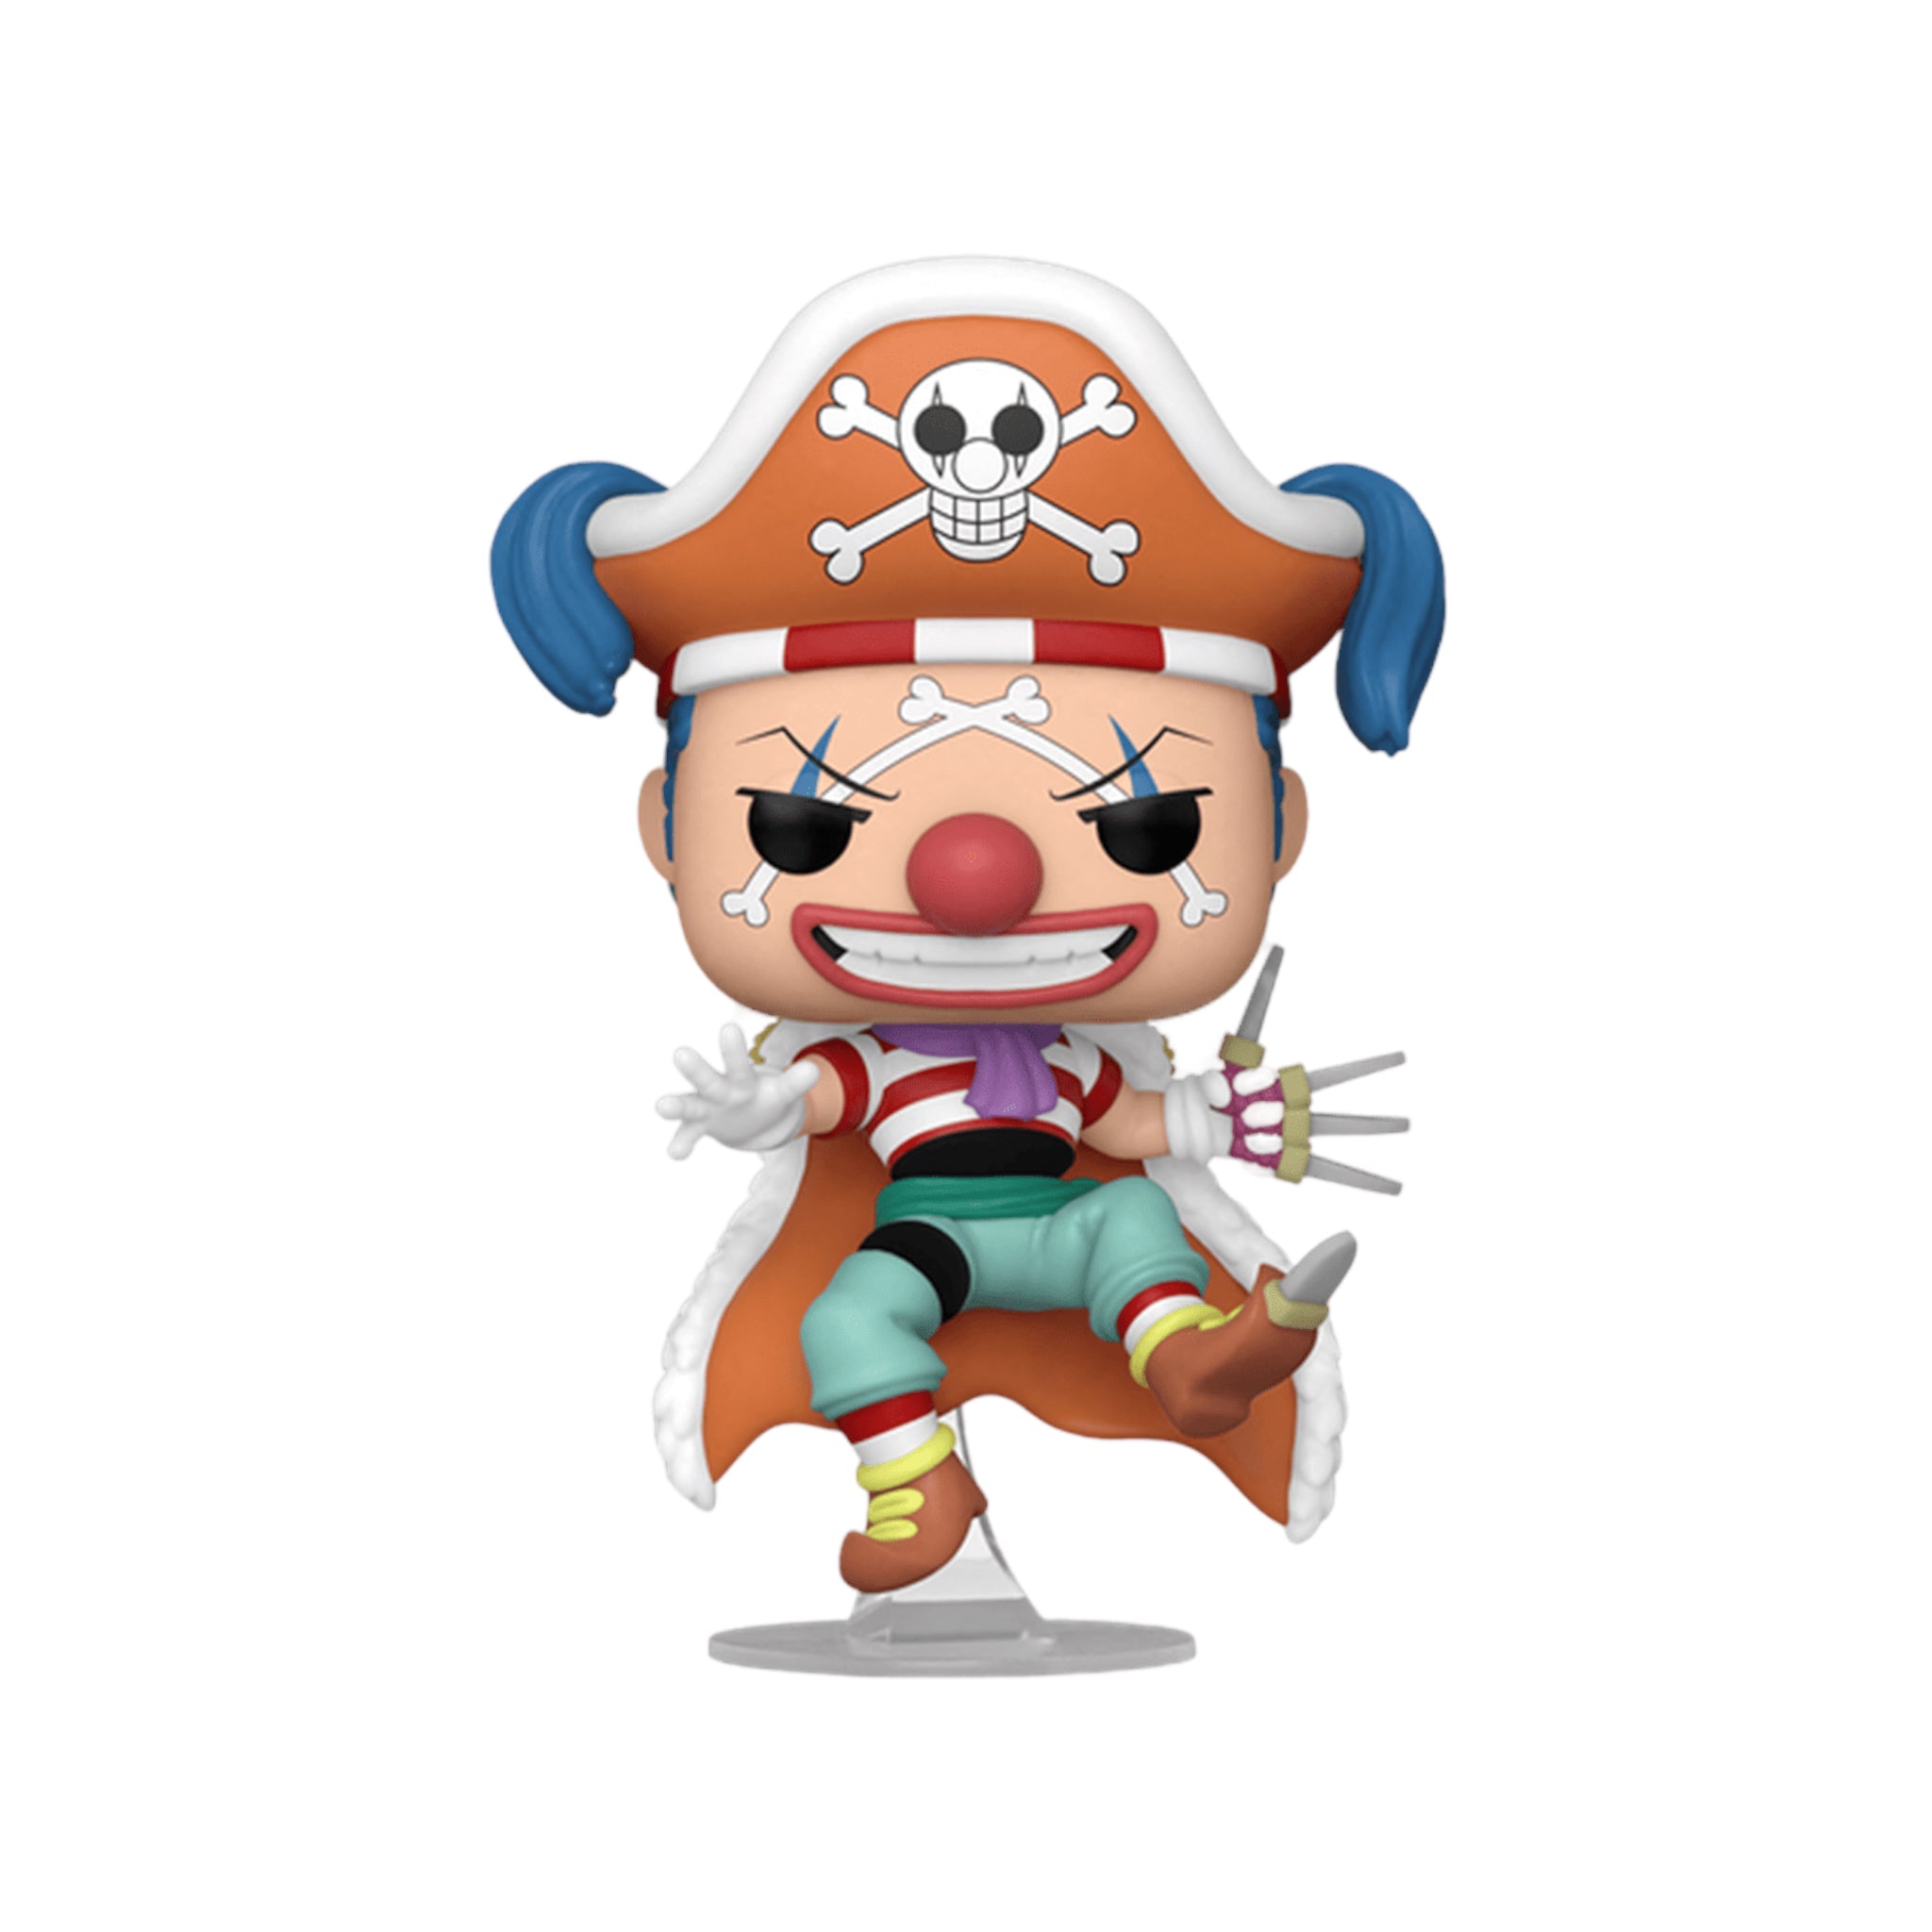 Buggy The Clown #1276 Funko Pop! - One Piece - Special Edition